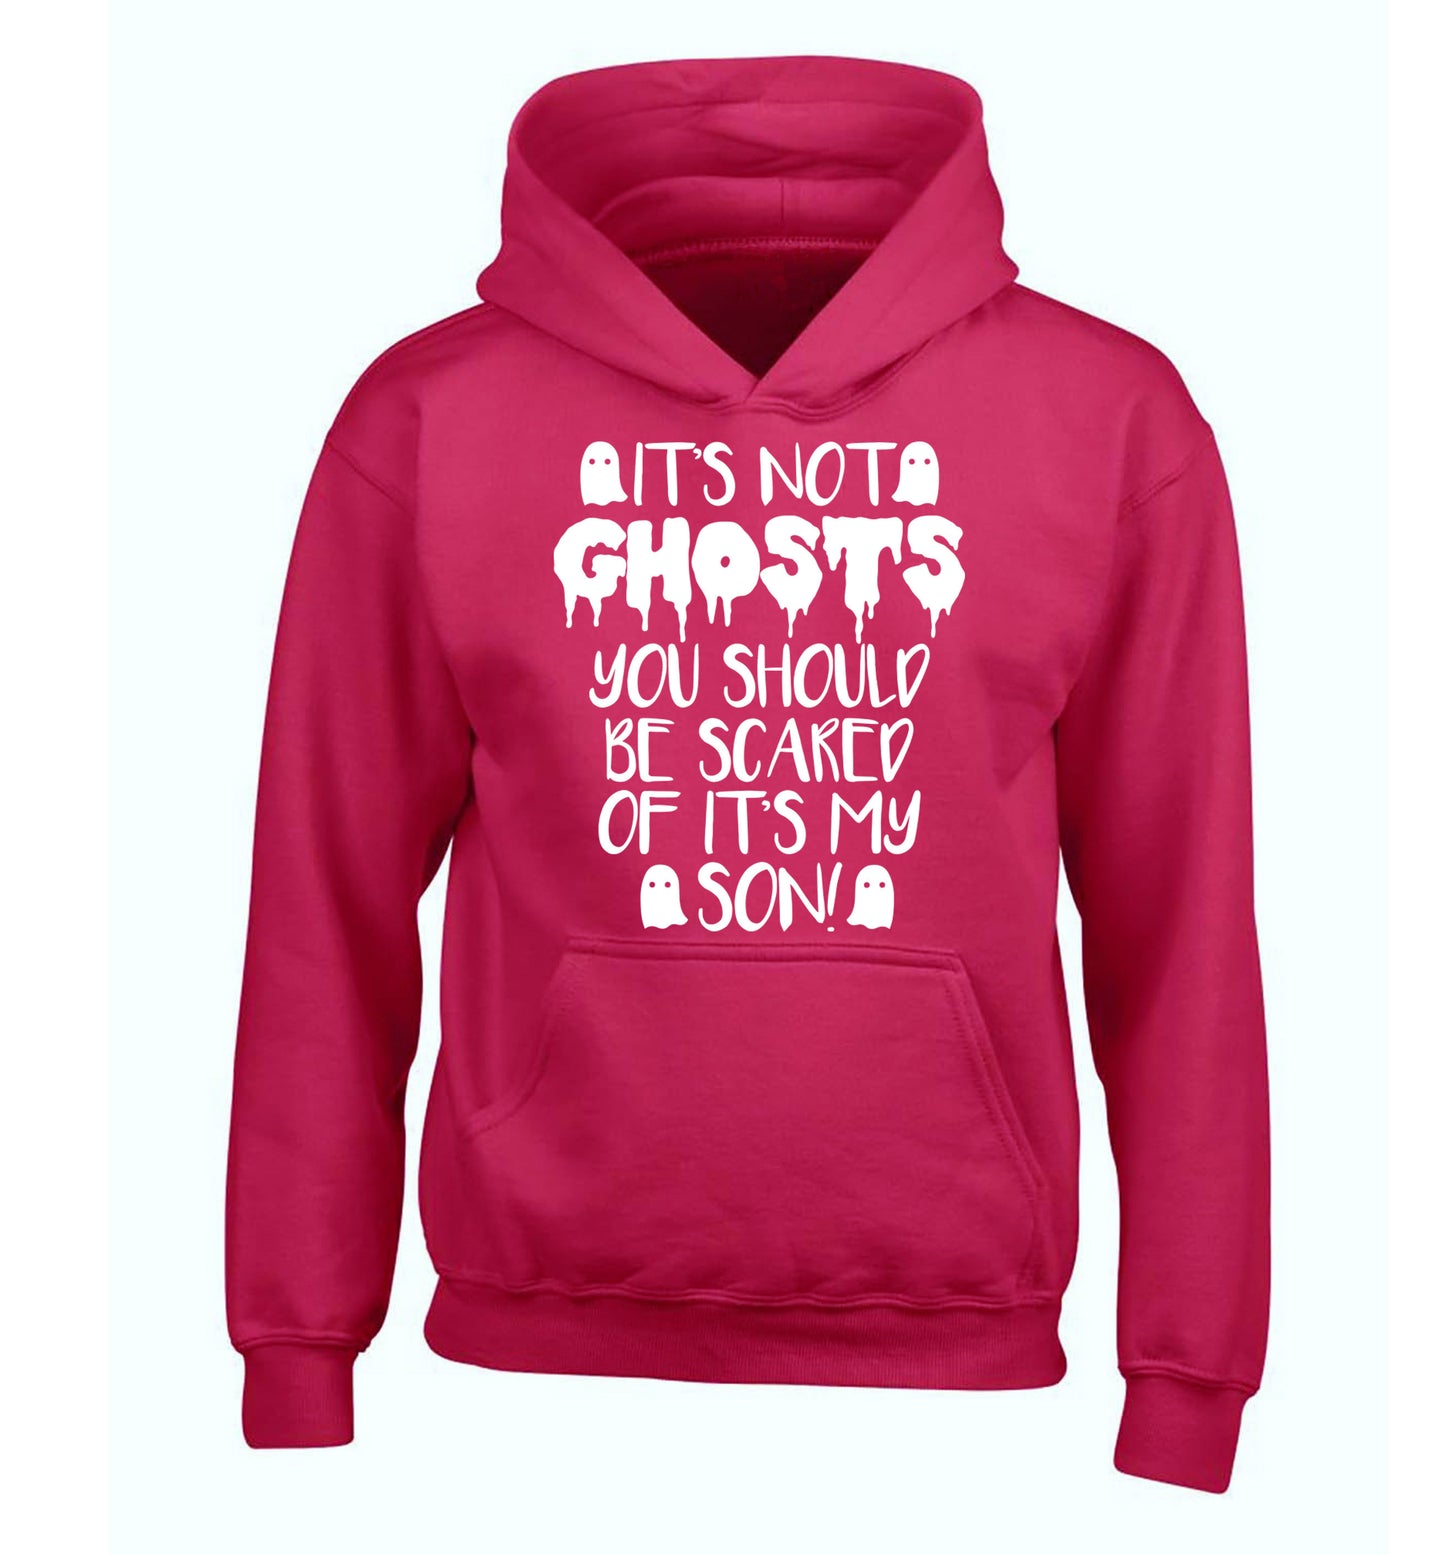 It's not ghosts you should be scared of it's my son! children's pink hoodie 12-14 Years